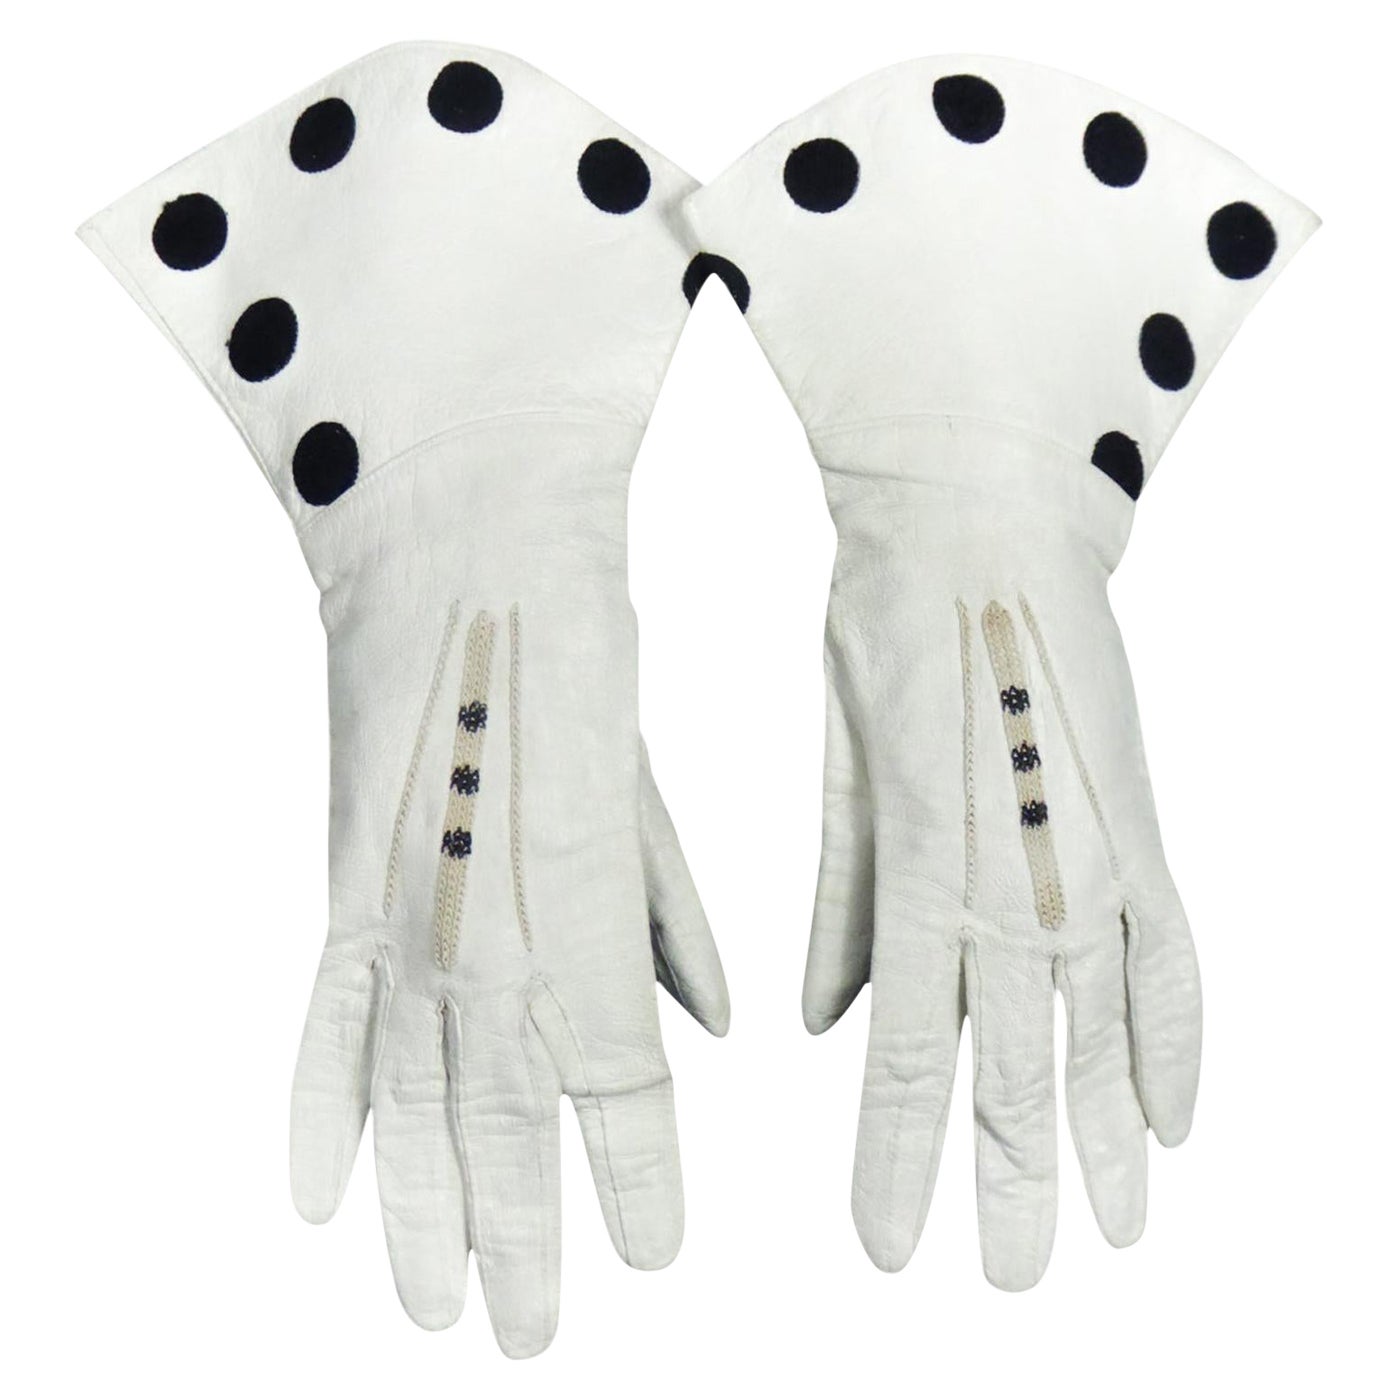 Pair of Gloves of Embroidered White leather - Circa 1950/1960 For Sale